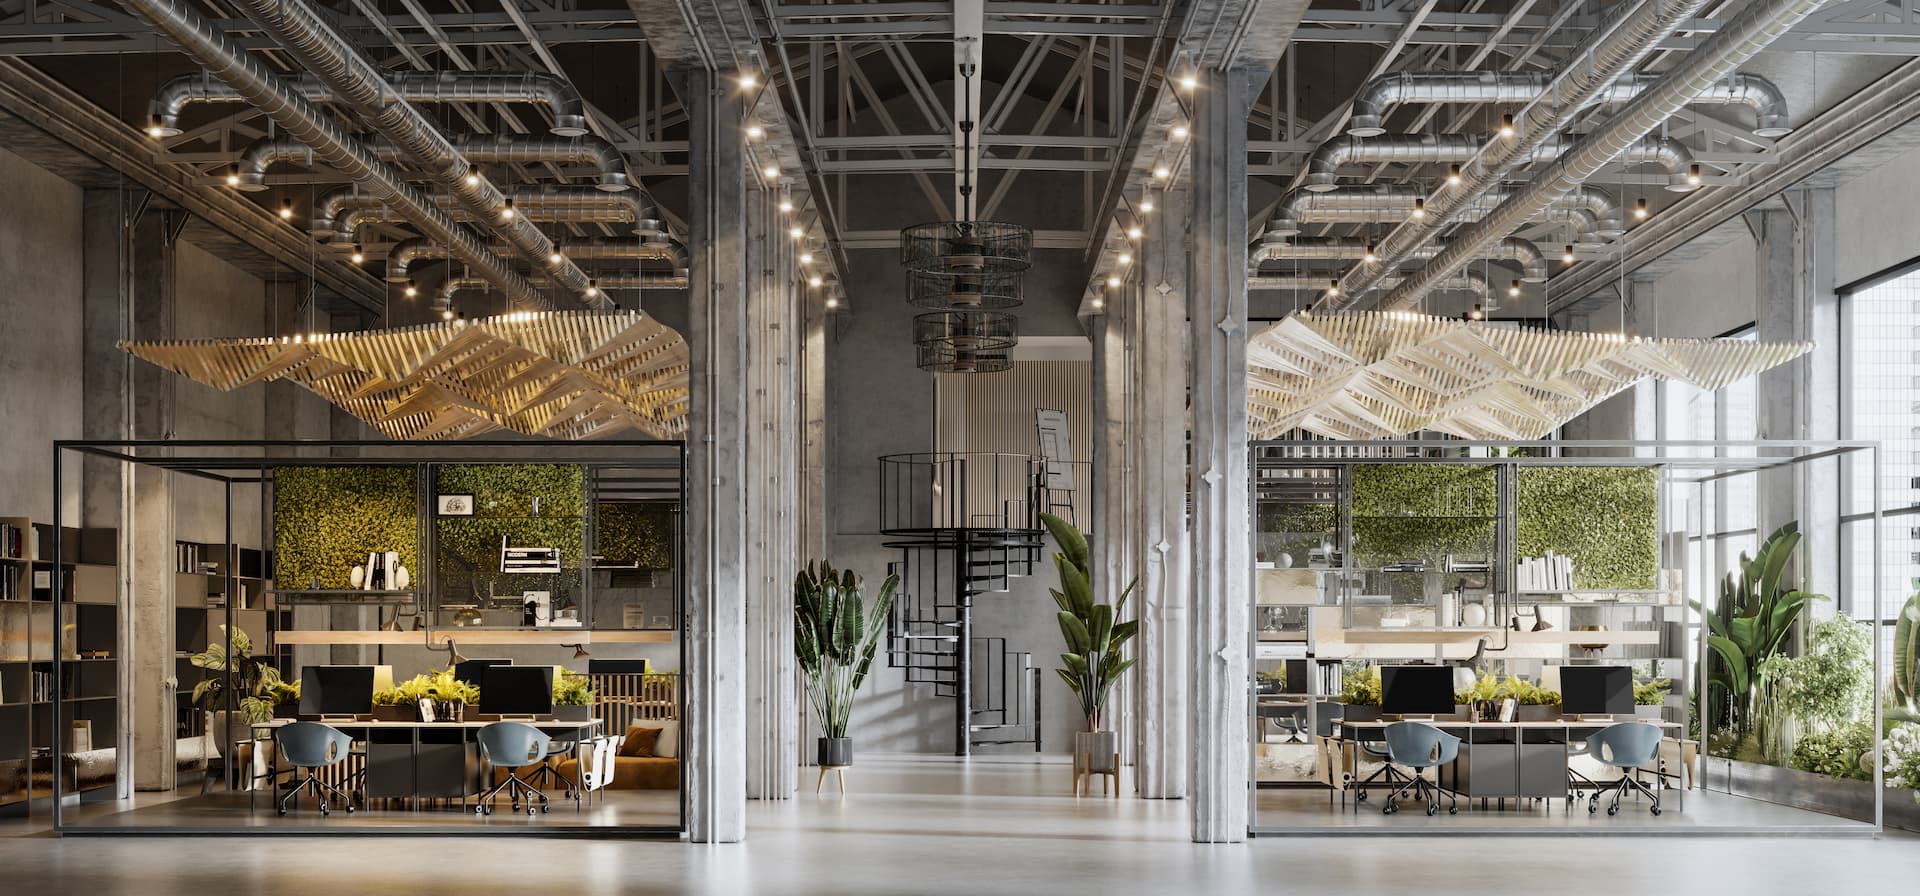 Large green office space with an industrial, modern decor